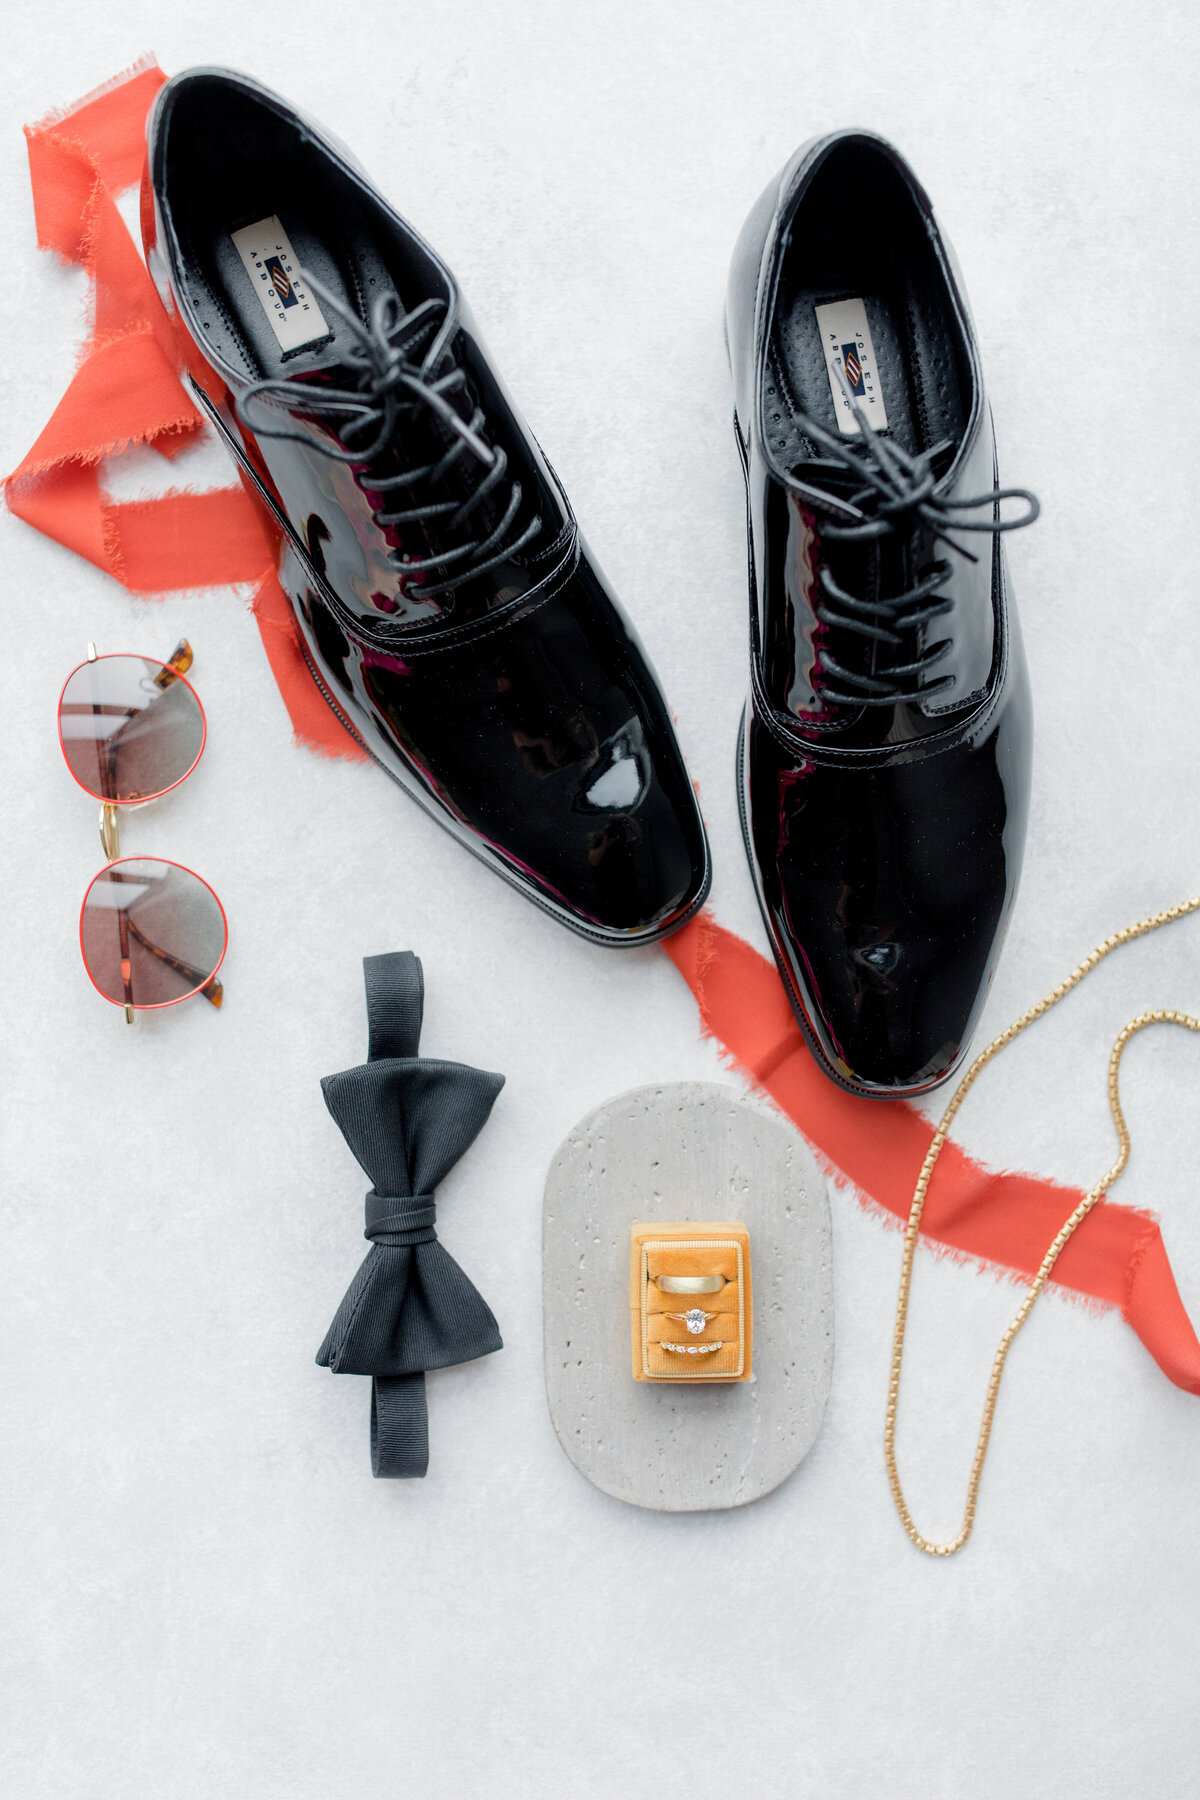 groom details including shoes, bowtie and sunglasses